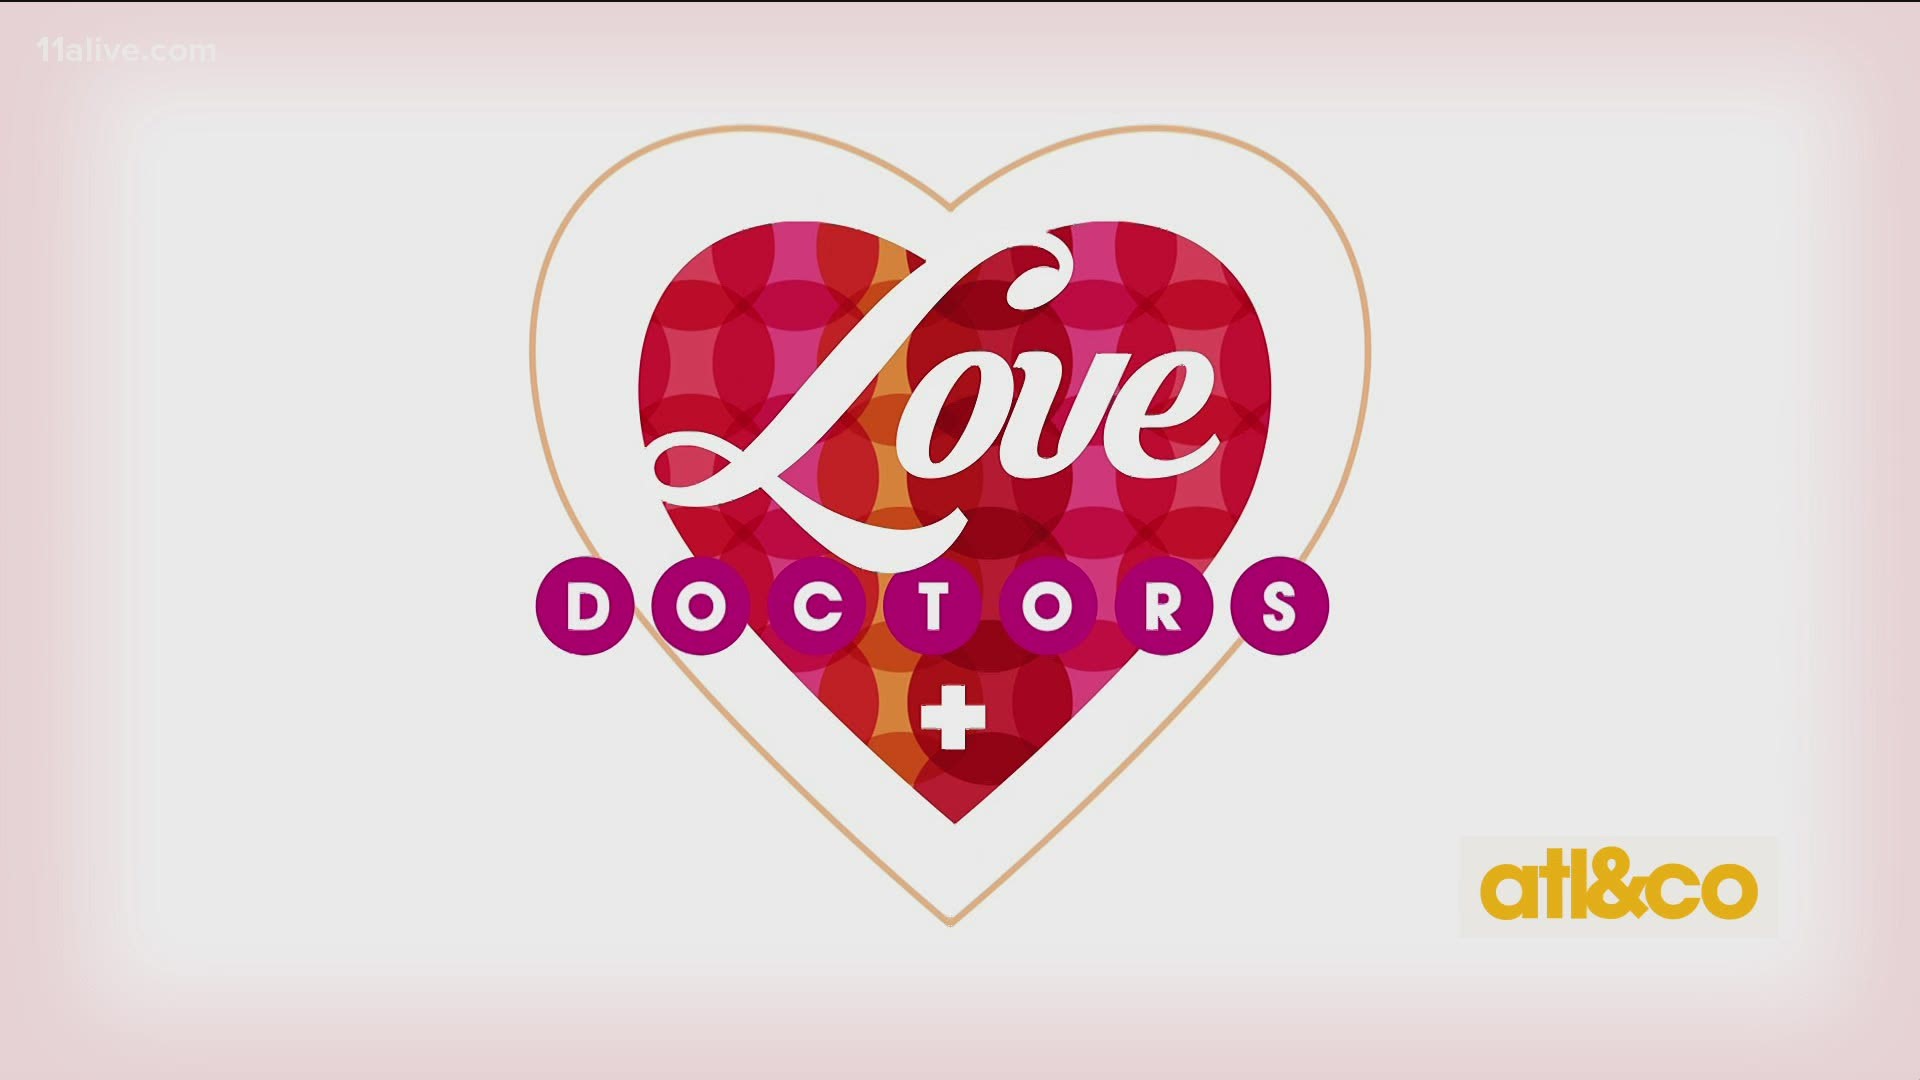 Love Doctors answer your relationship Q's | 11alive.com